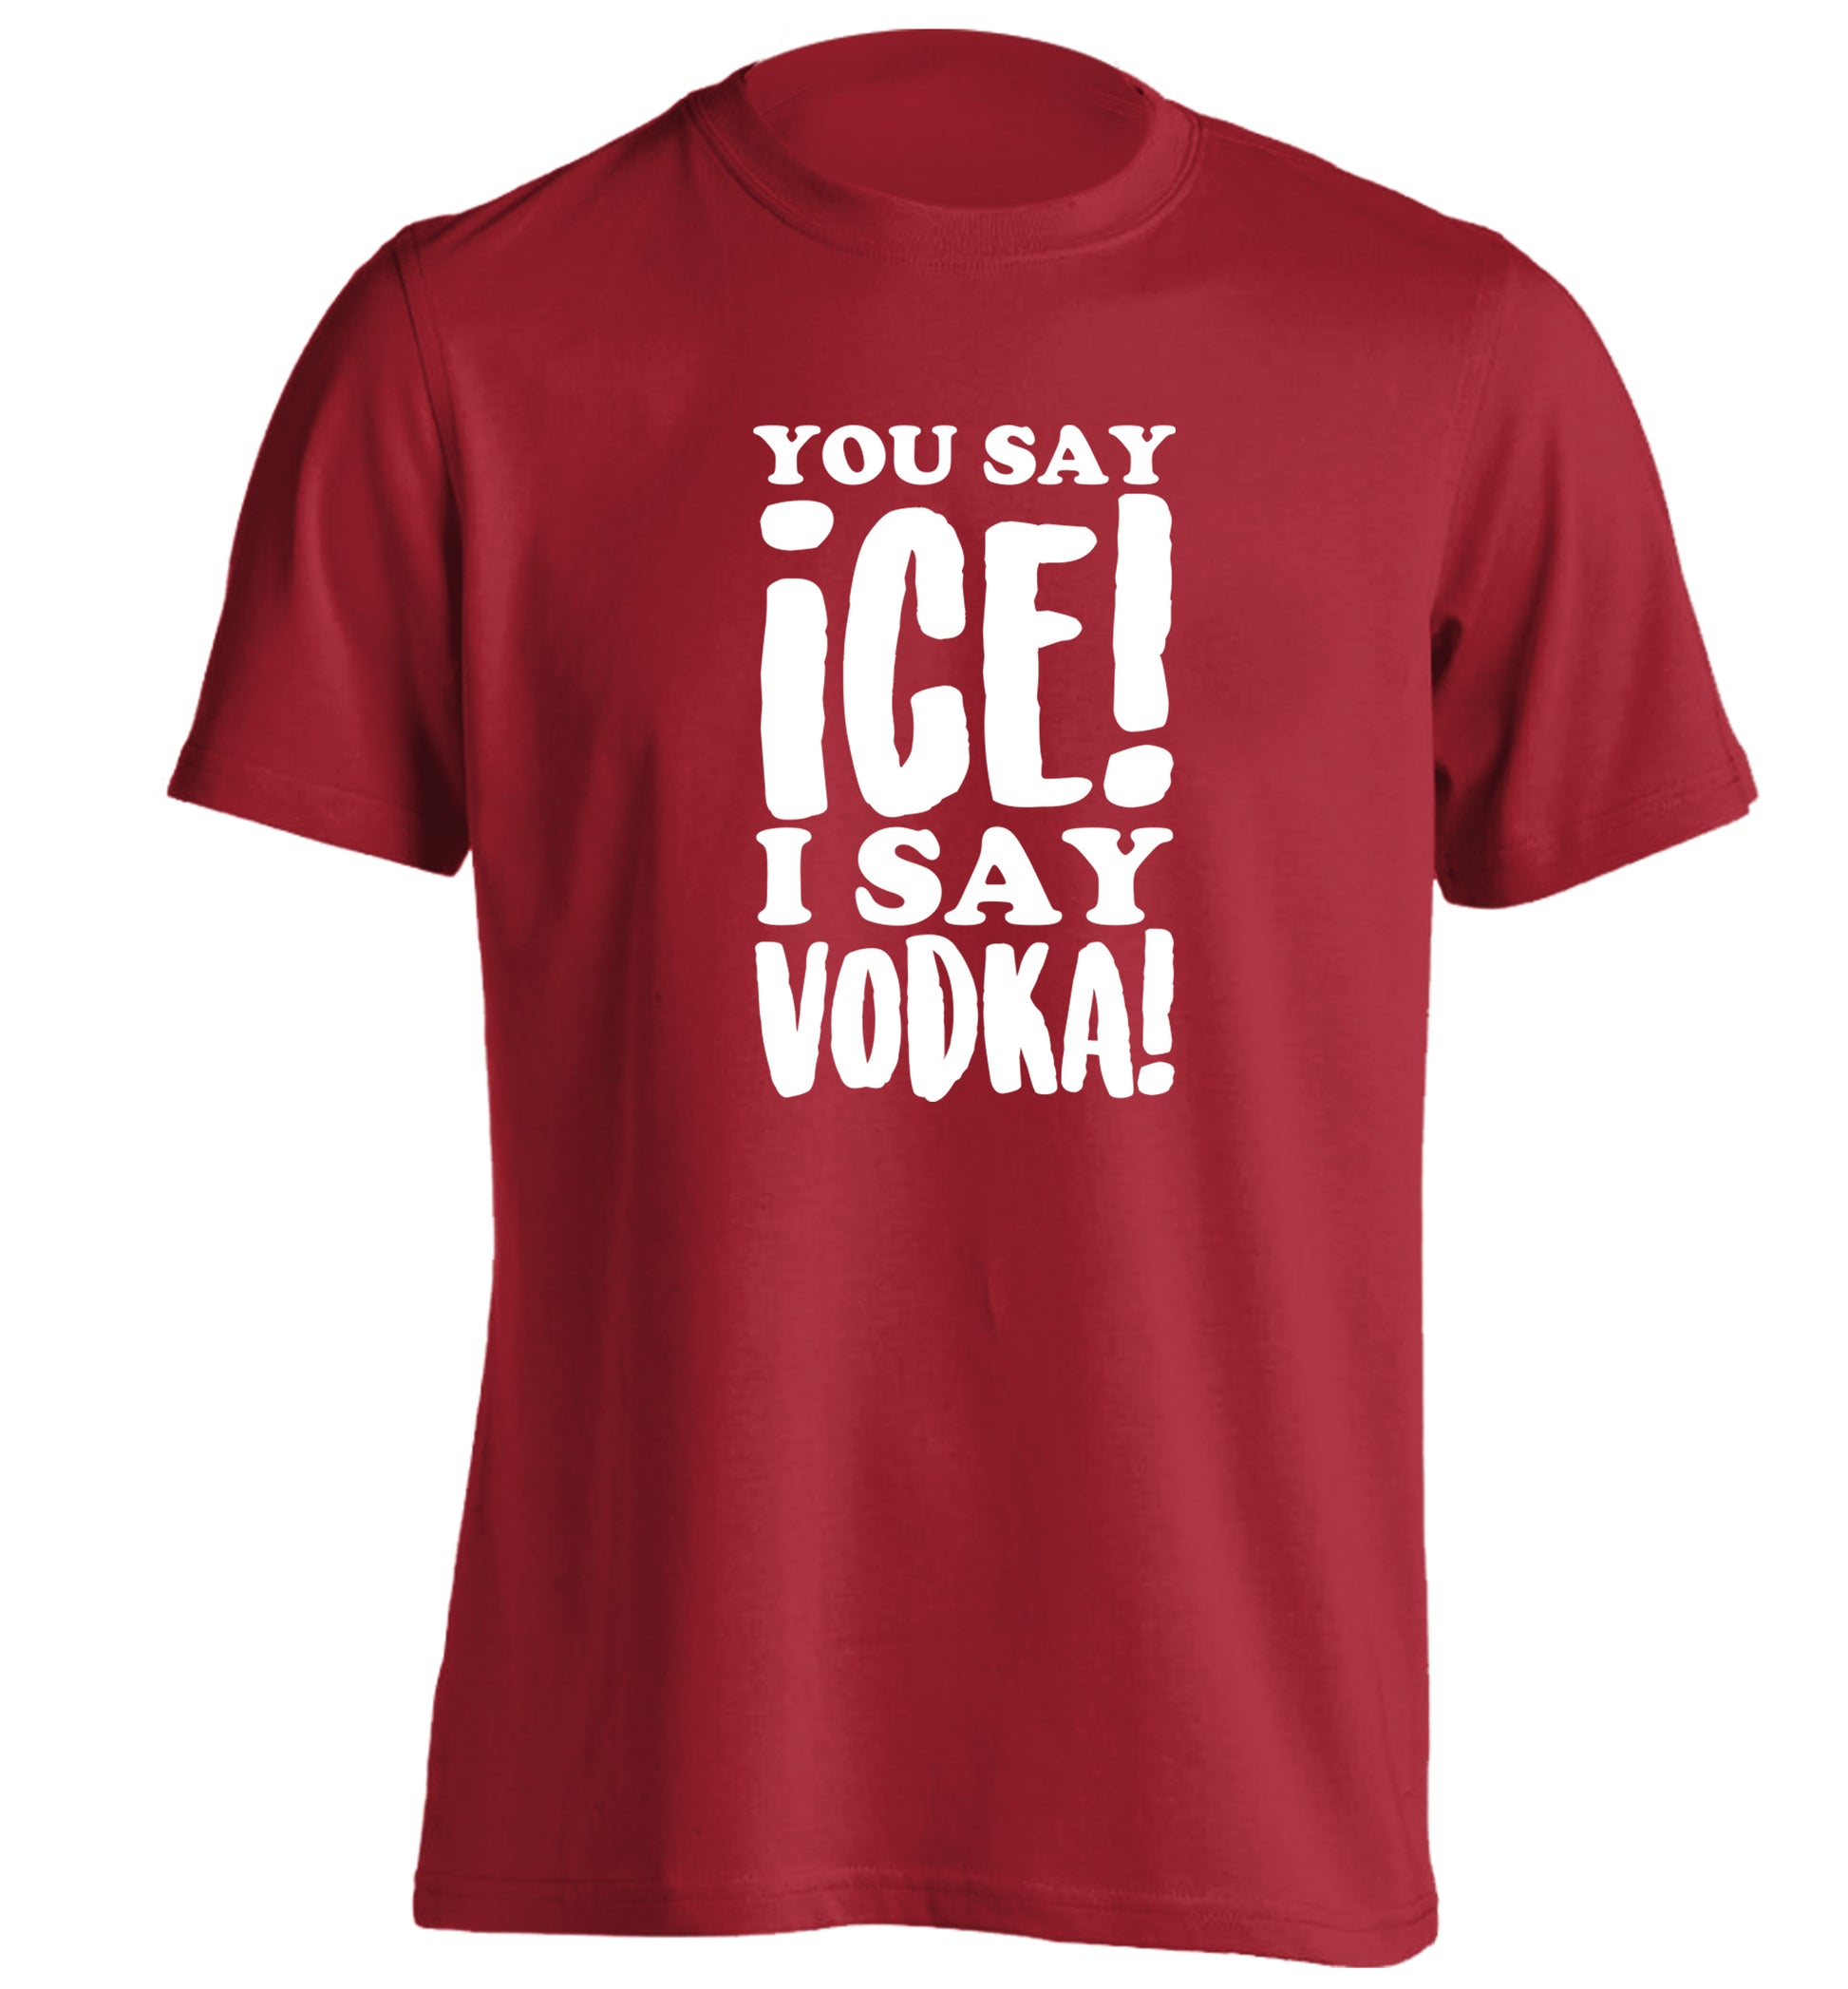 You say ice I say vodka! adults unisex red Tshirt 2XL